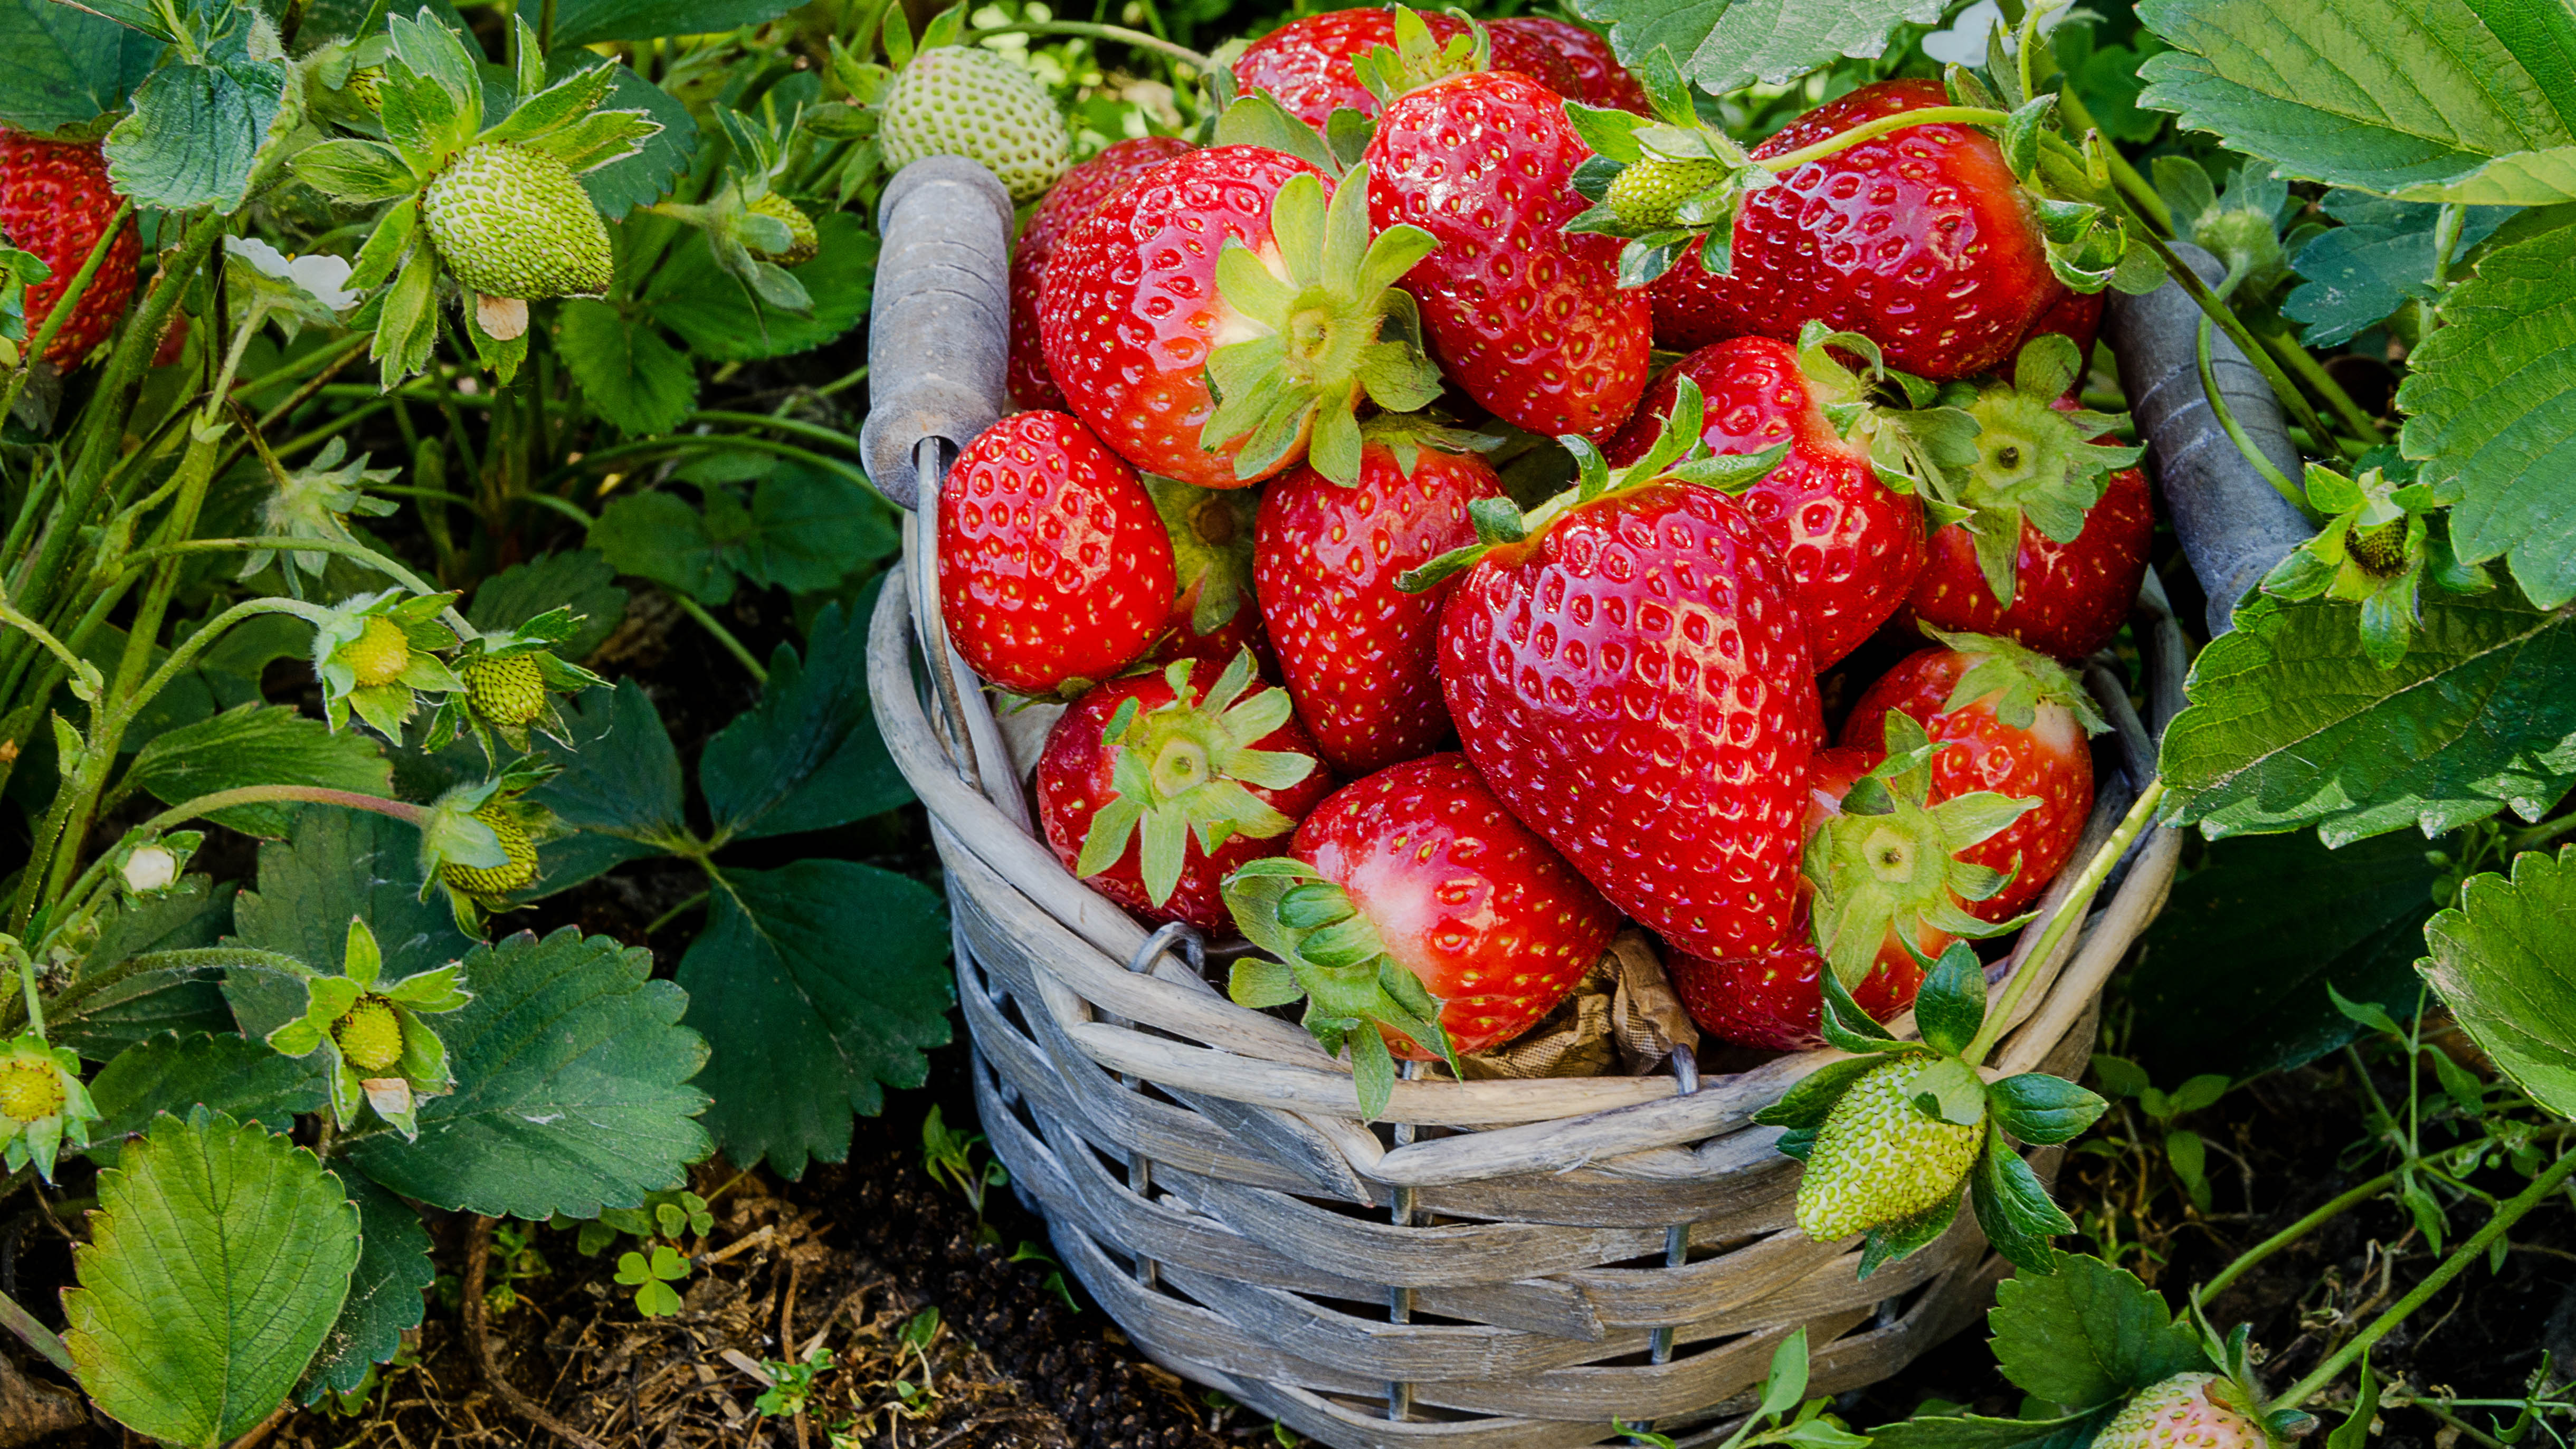 How to grow strawberries — 4 simple steps